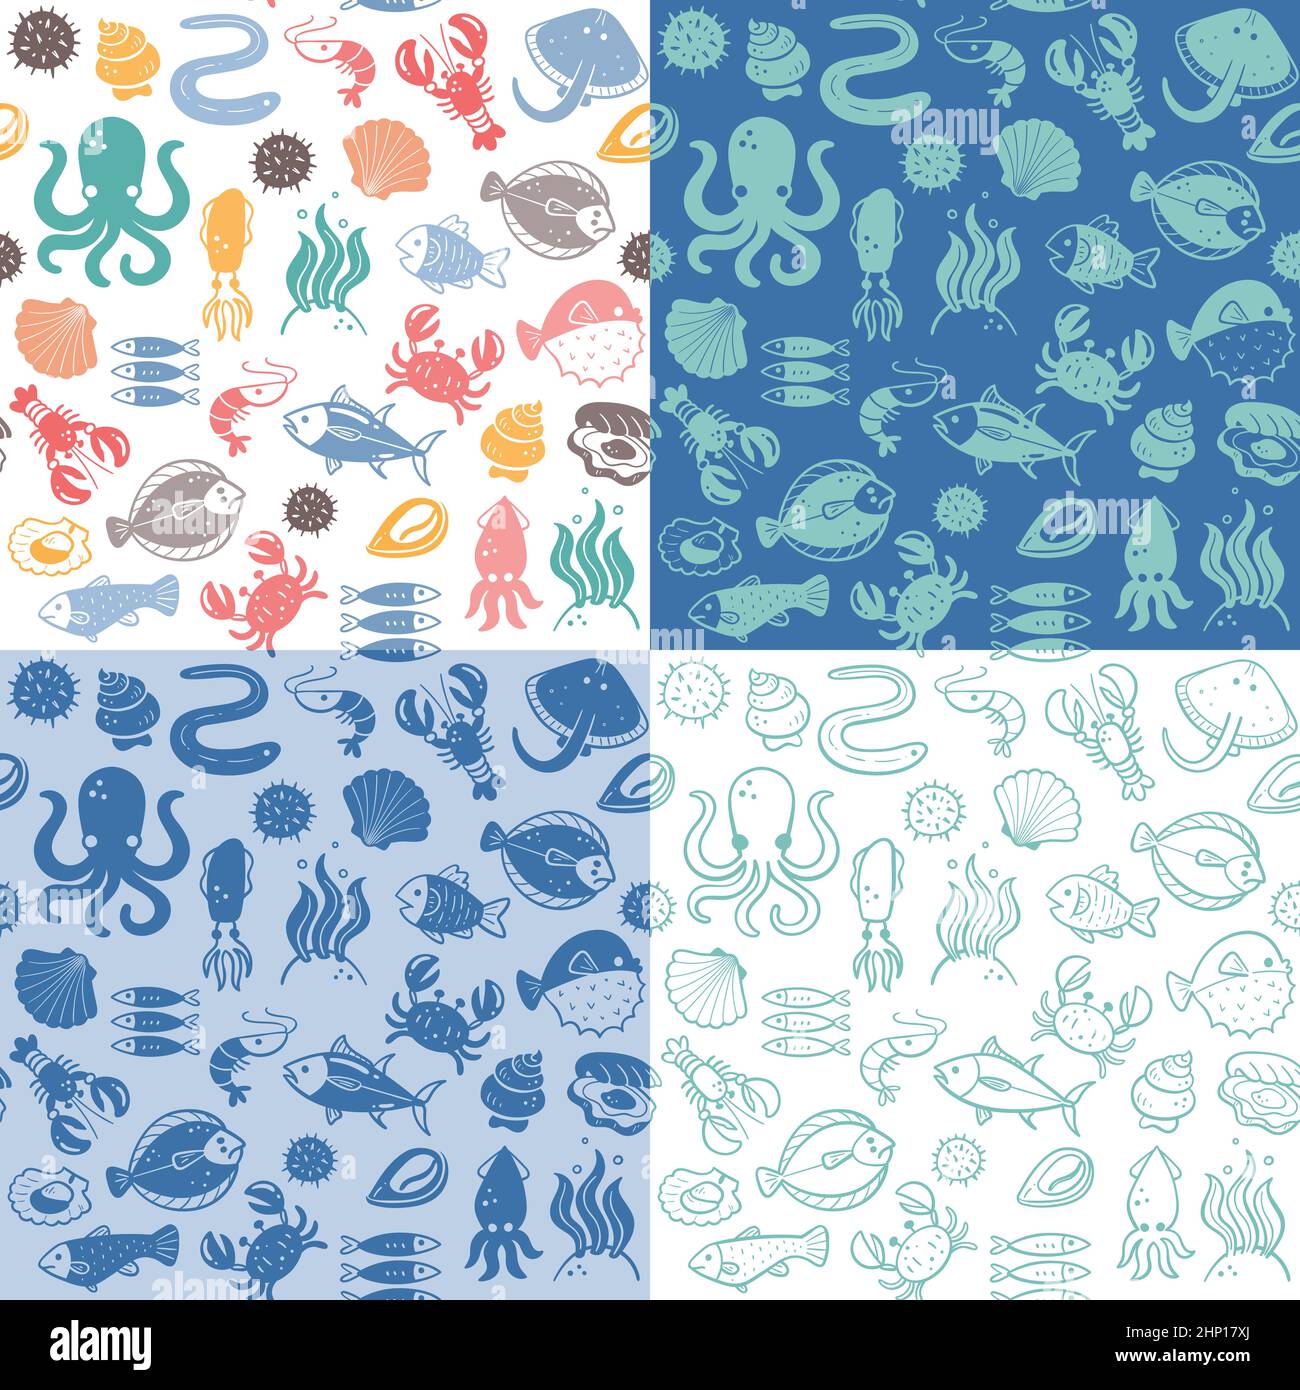 Seafood seamless pattern collection. Fish, seaweed and shellfish. Food ingredients for cooking illustration. Colorful, monochrome silhouettes and dood Stock Vector